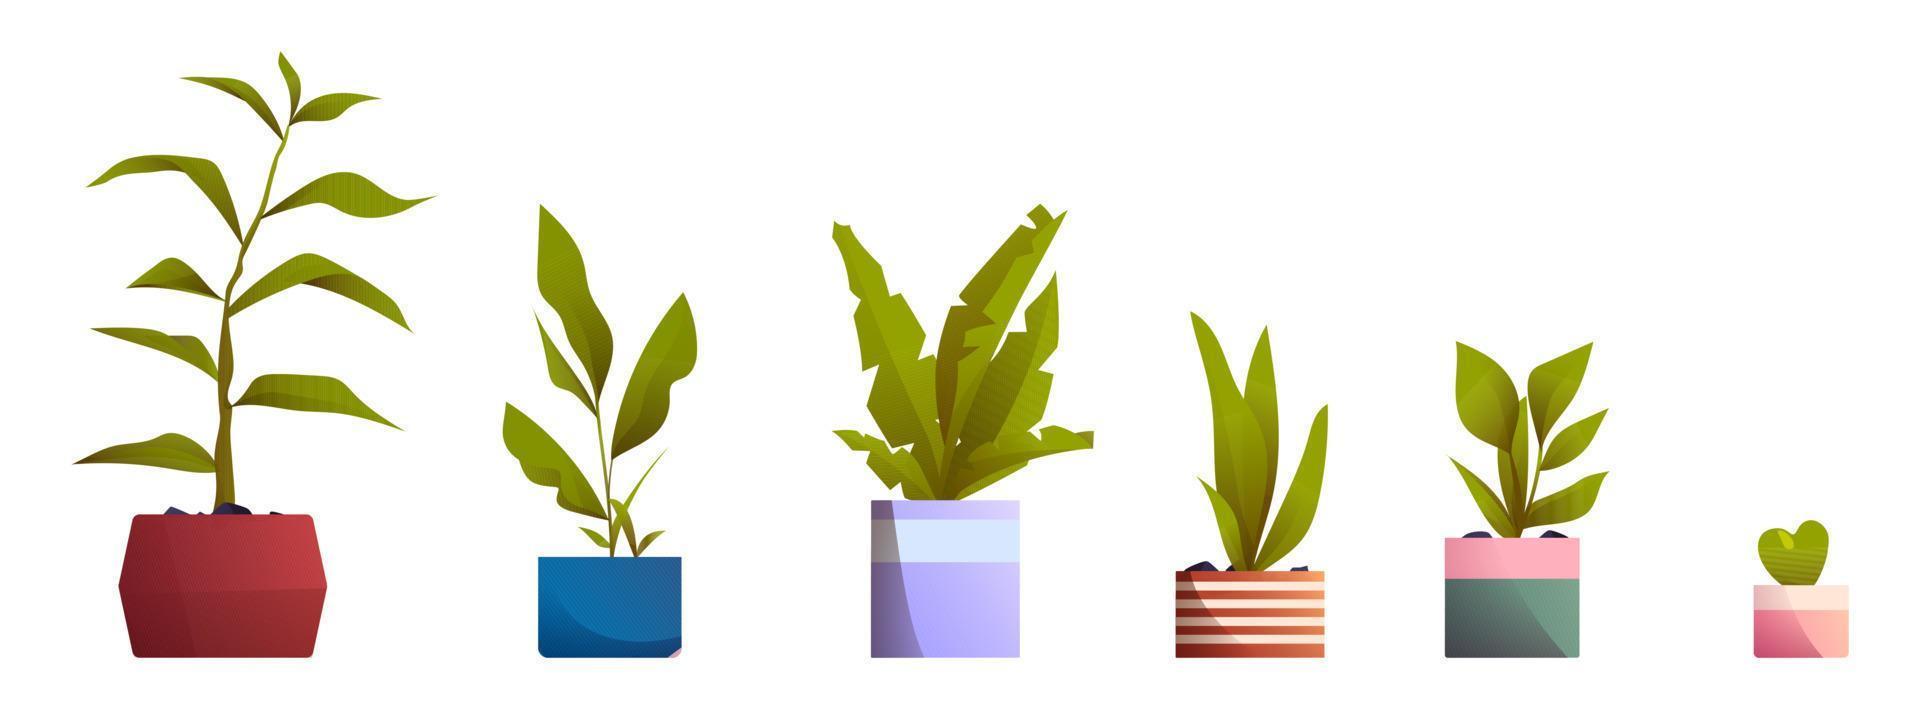 Plants in pots for home and office interior vector